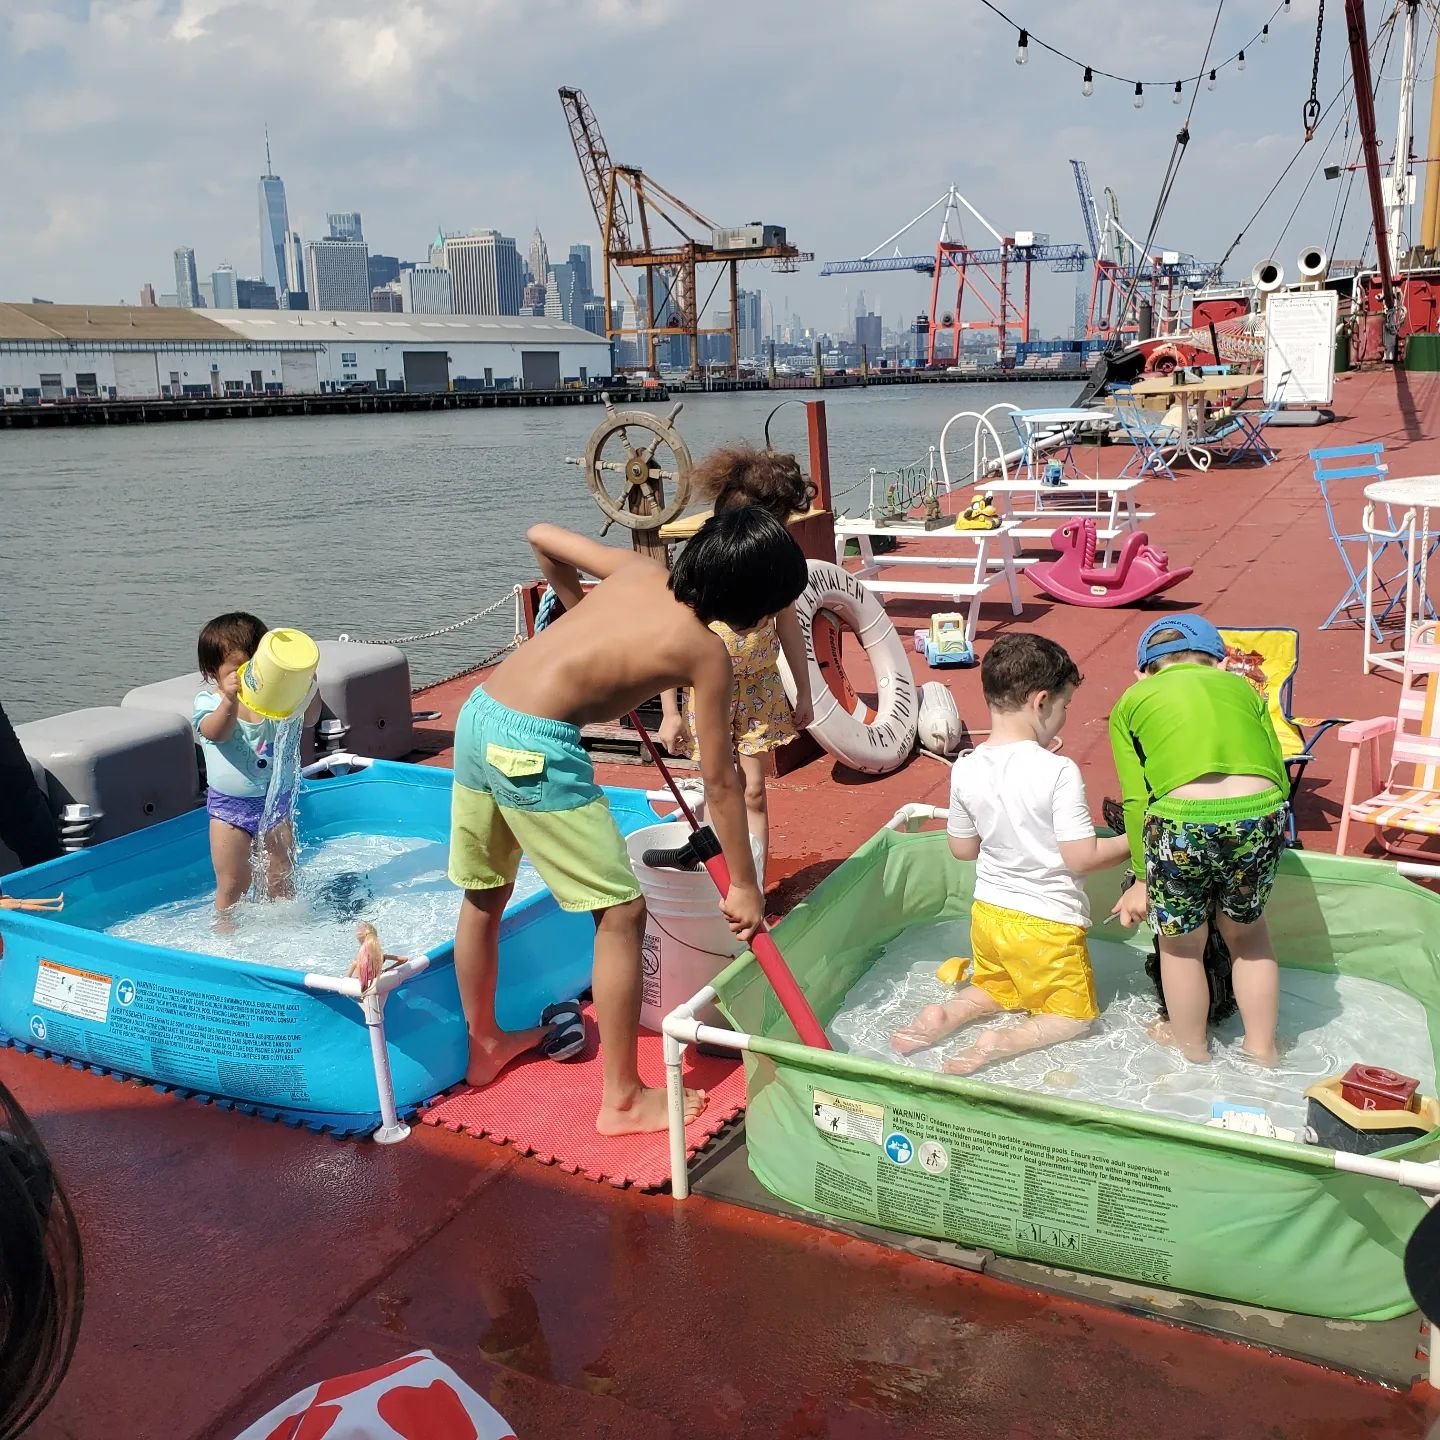 A successful kiddie pool session during #TankerTime is when all the toys end up in the pool. We give today's season opener a 10/10. 💦

On #historicship #MaryWhalen in #RedHook #Brooklyn #NYC